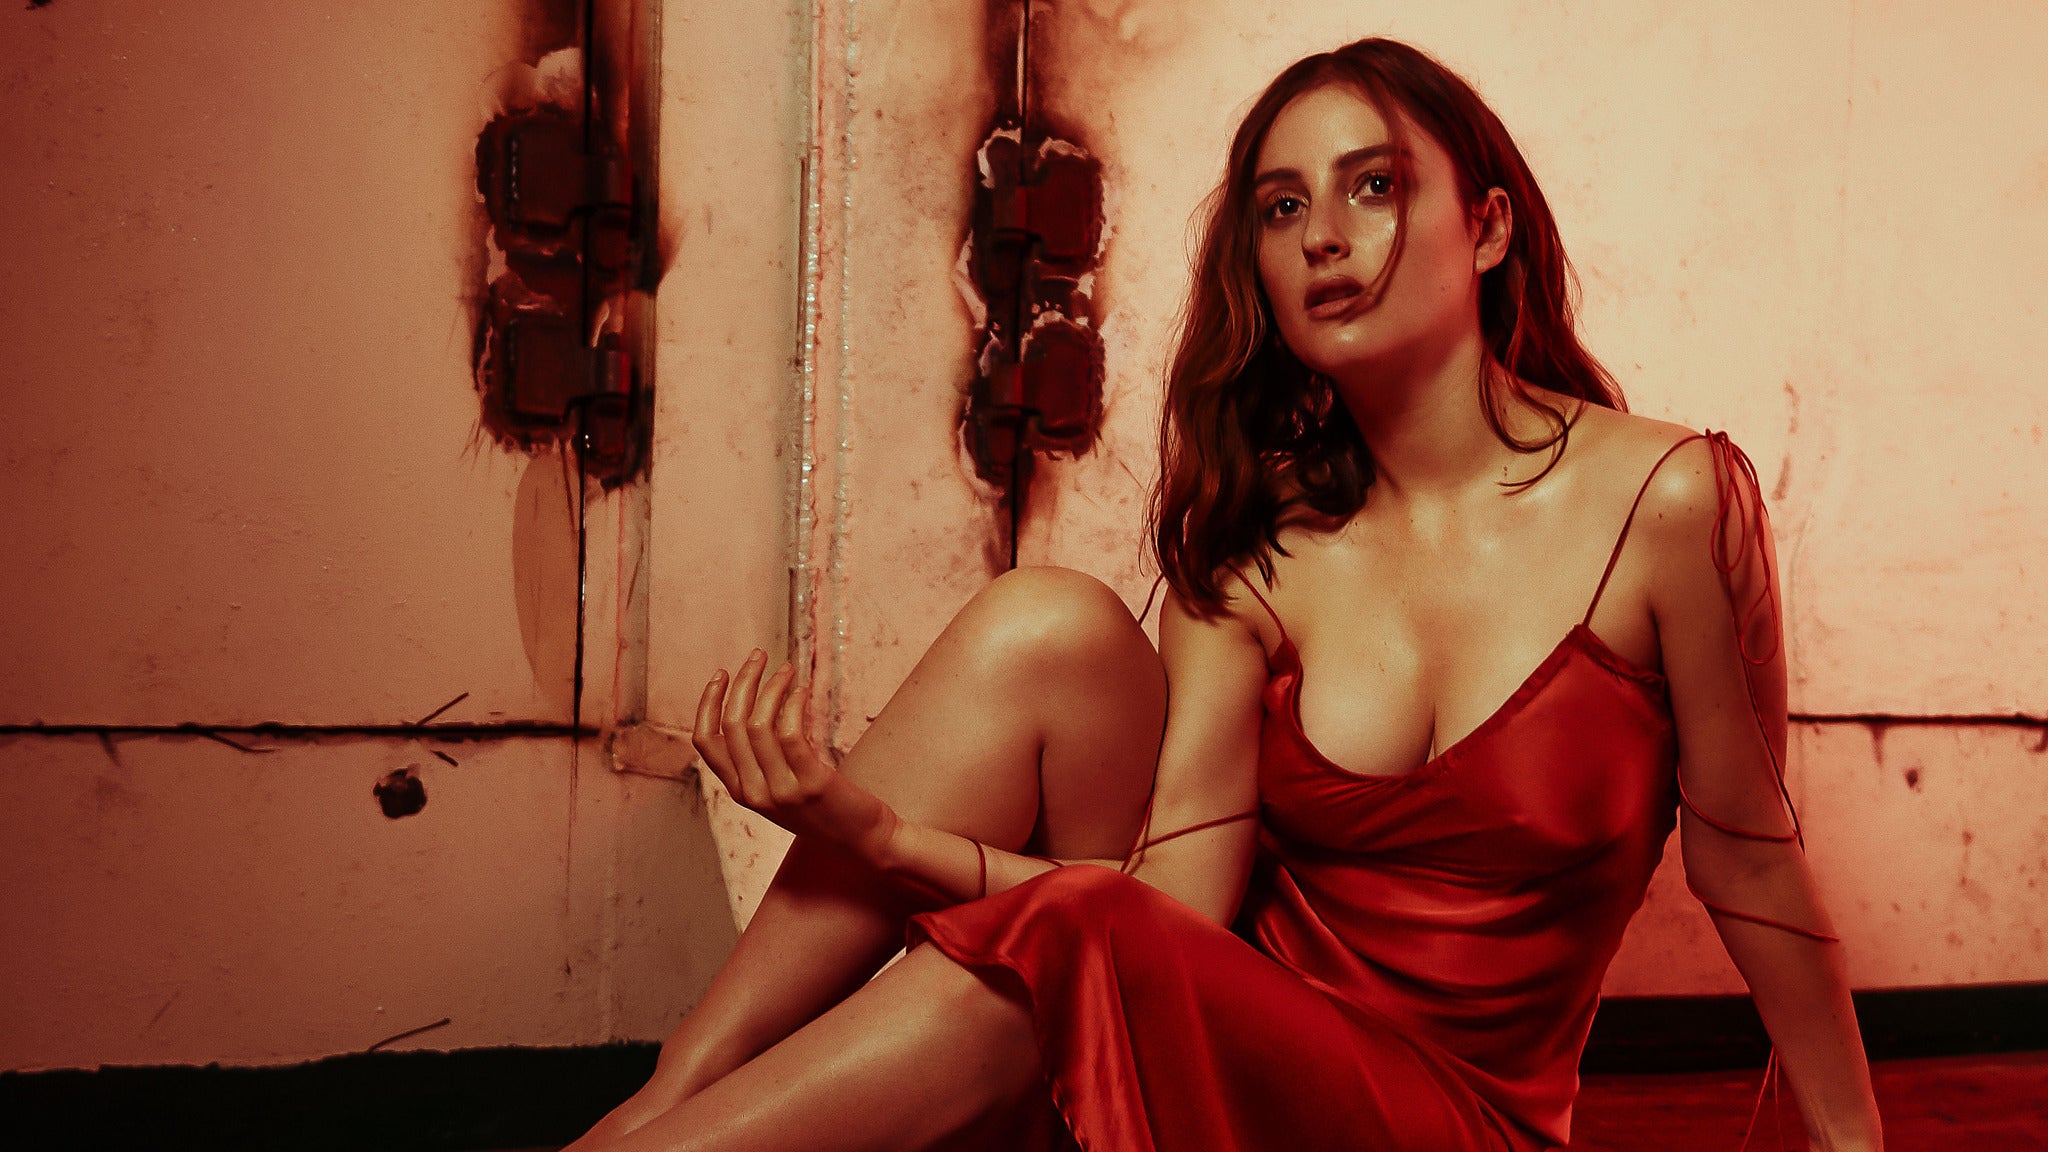 BANKS - The III Tour in Charlotte promo photo for Spotify presale offer code